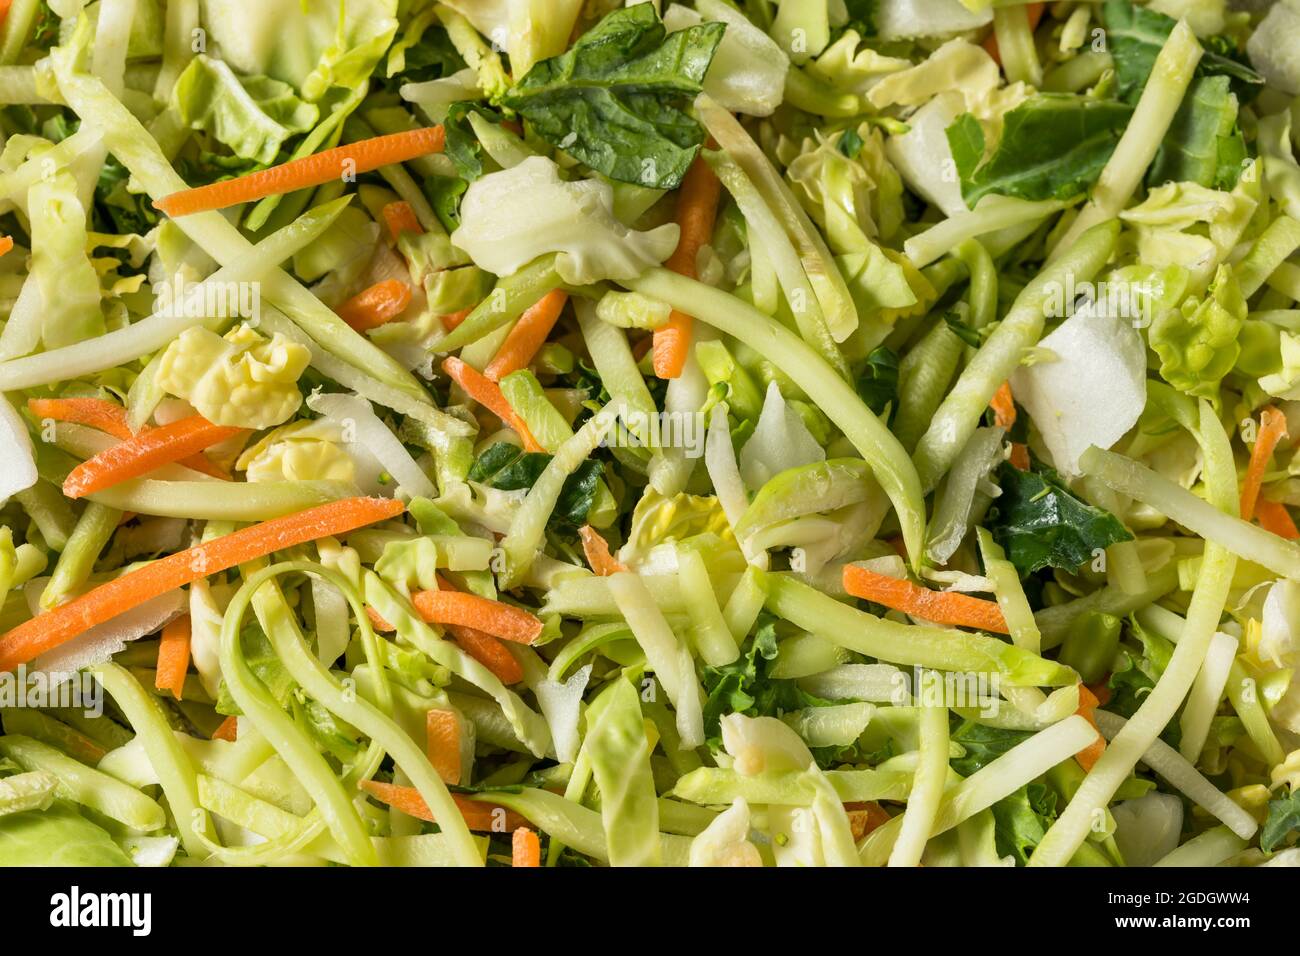 Healthy Homemade Shredded Cabbage Vegetable Power Blend in a Bowl Stock Photo